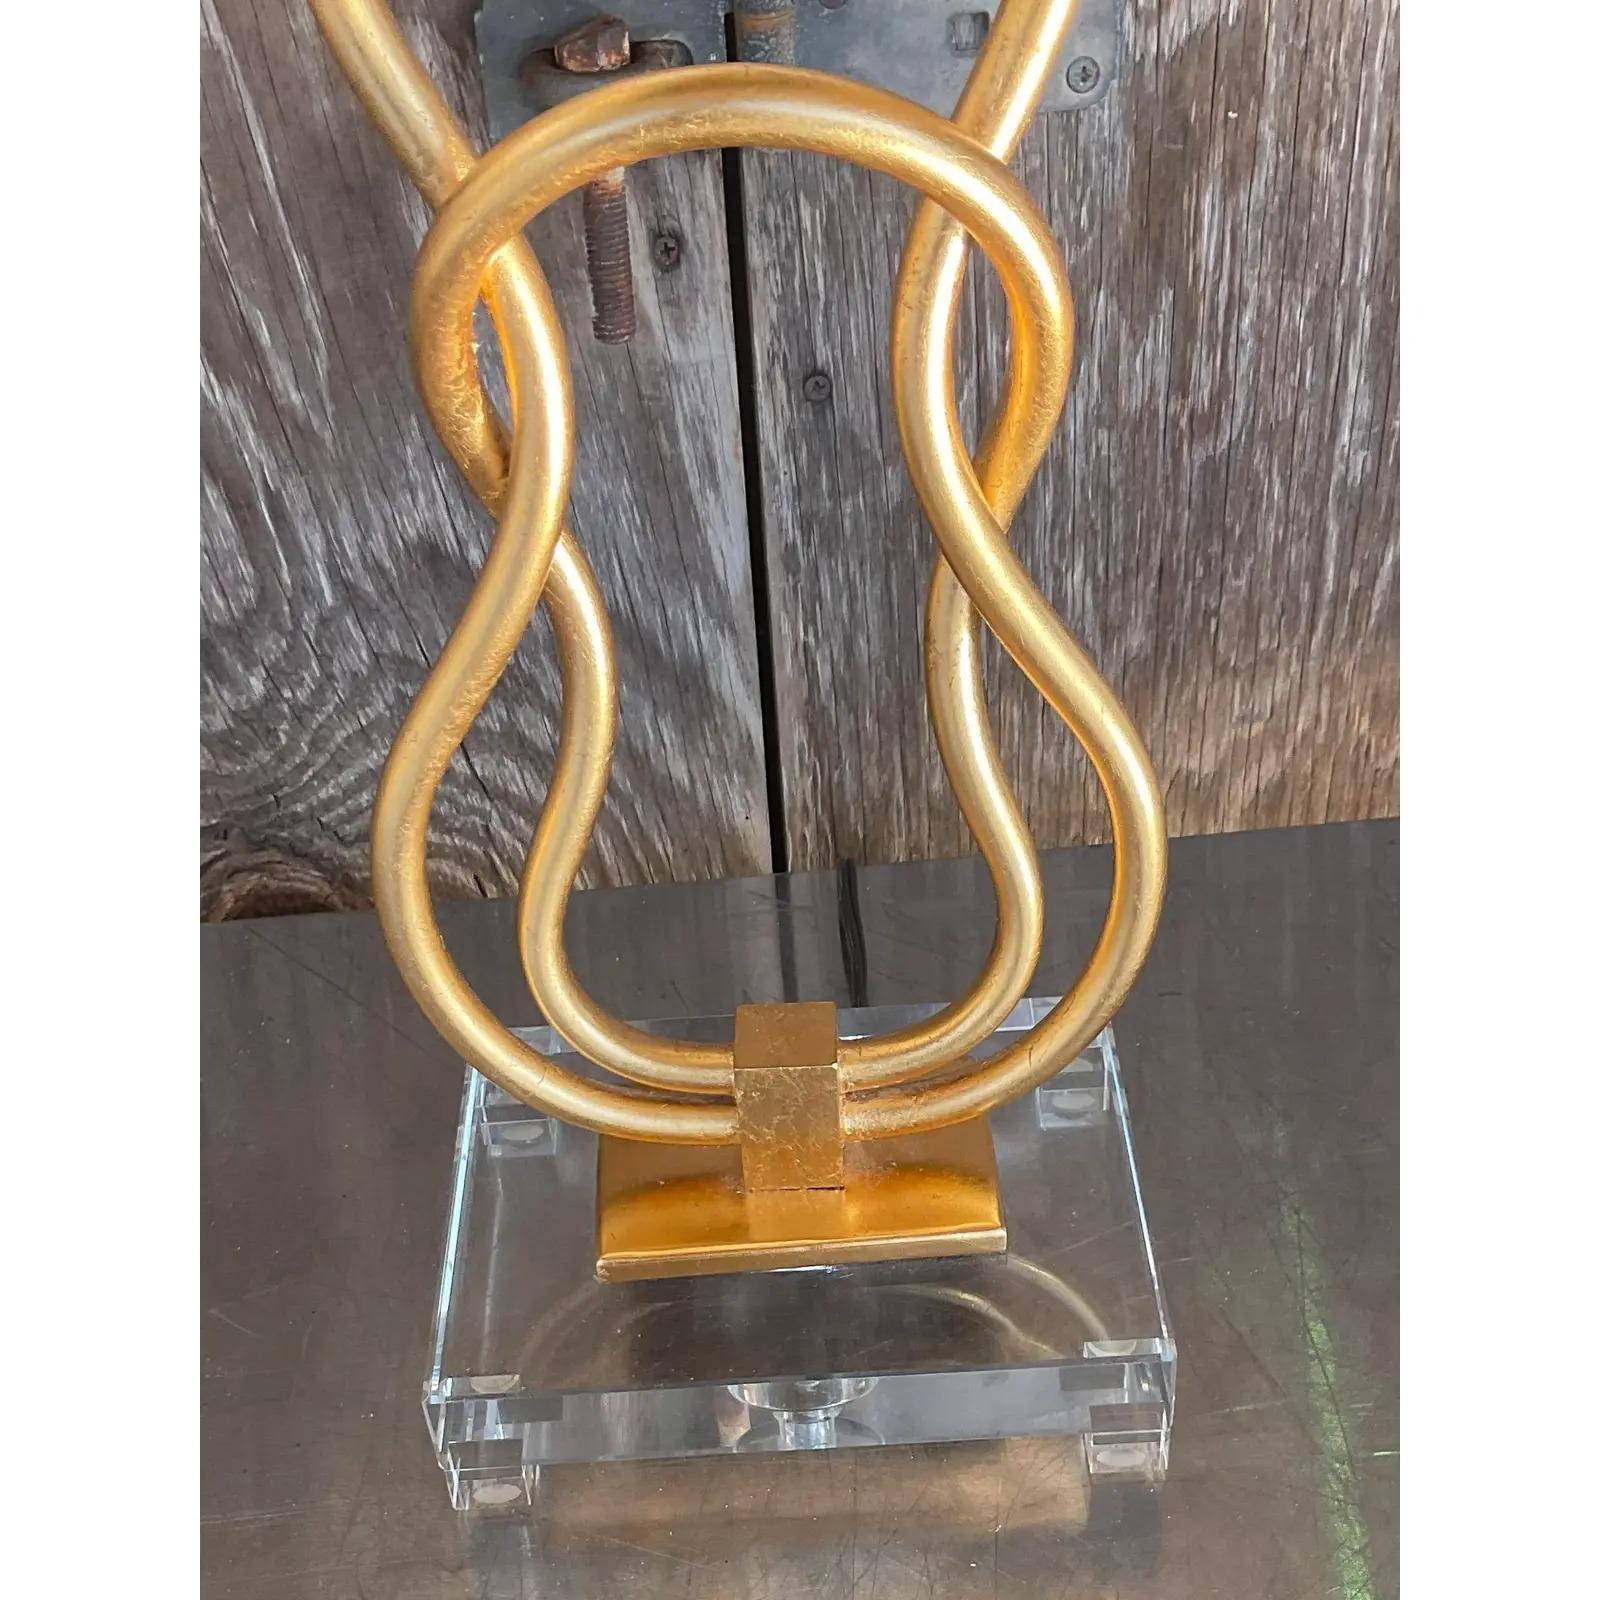 A fantastic pair of vintage Contemporary table lamps. Beautiful linked gilt rings resting on a lucite plinth. Coordinating shade in an ecru color. Acquired from a Palm Beach estate. 

The lamps are in great vintage condition. Minor scuffs and